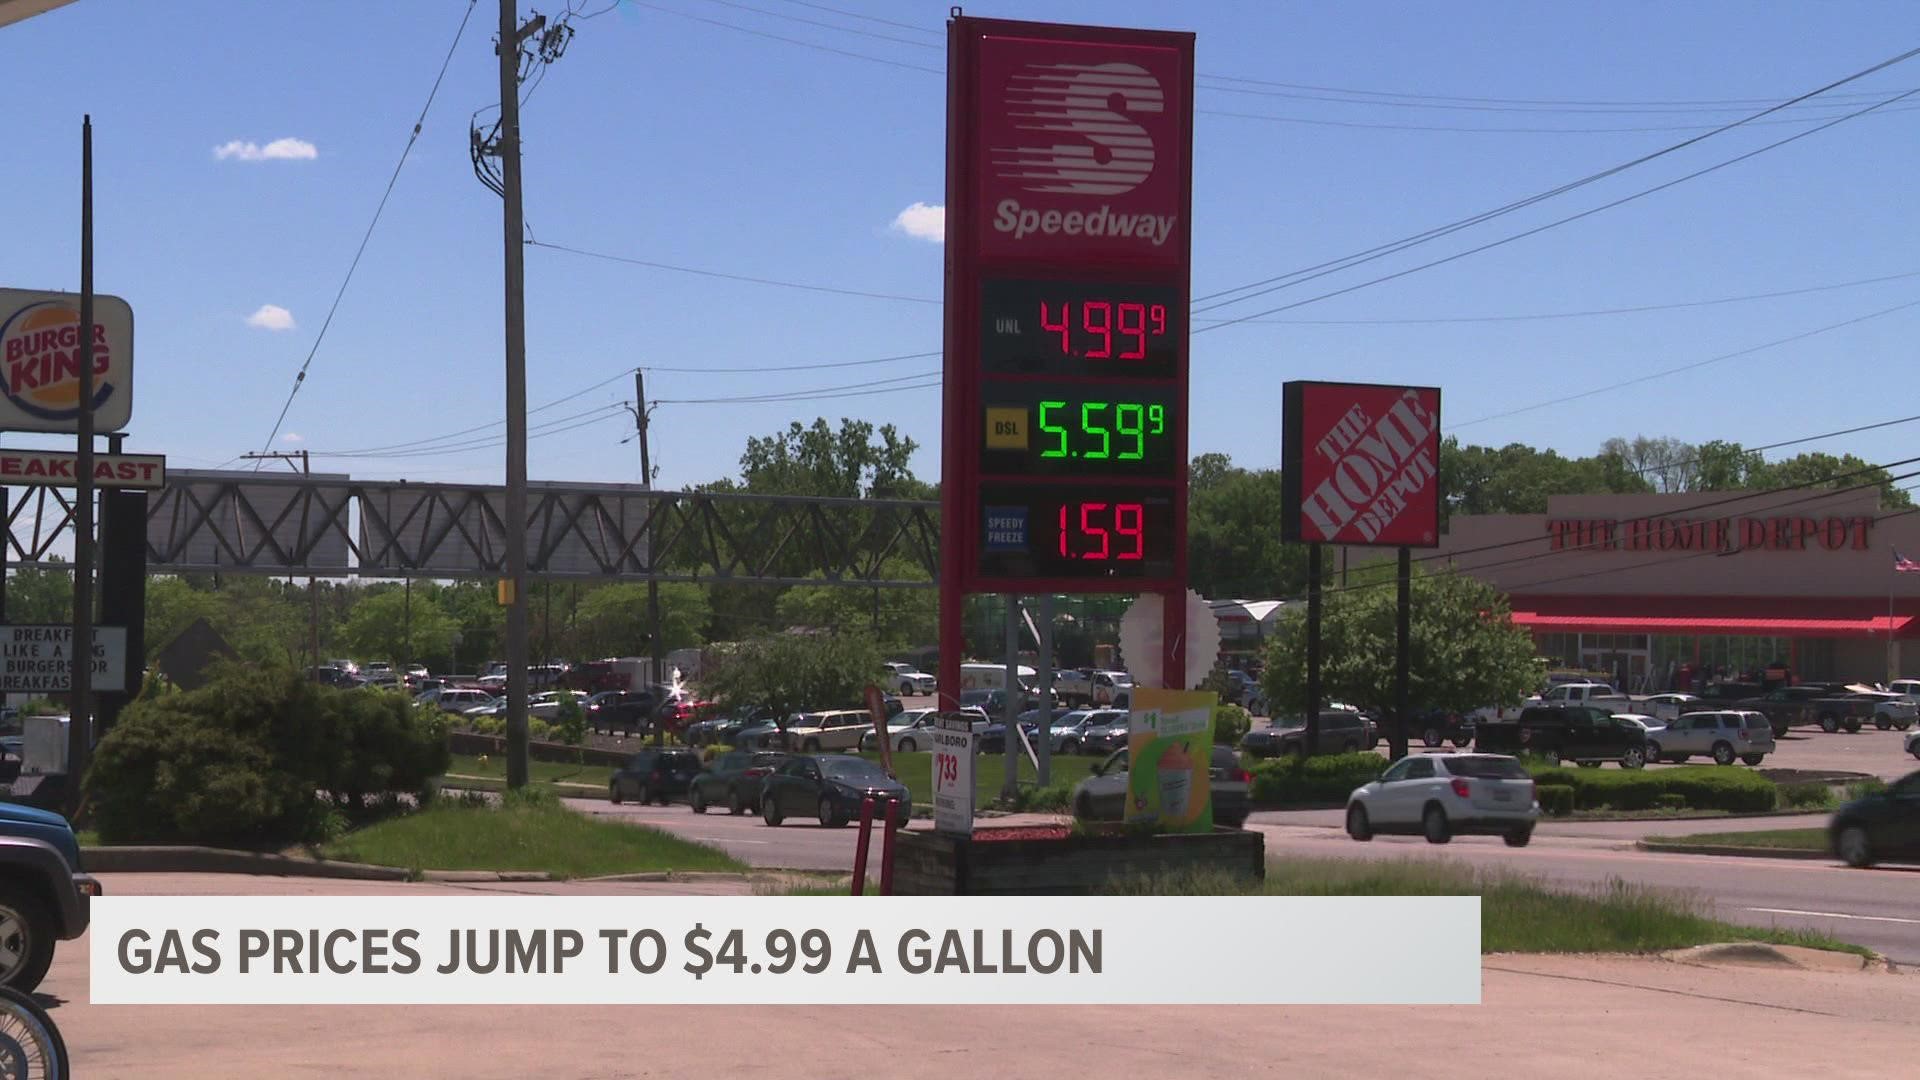 "It's going to be a dicey summer," says petroleum expert Patrick De Haan about gas prices.